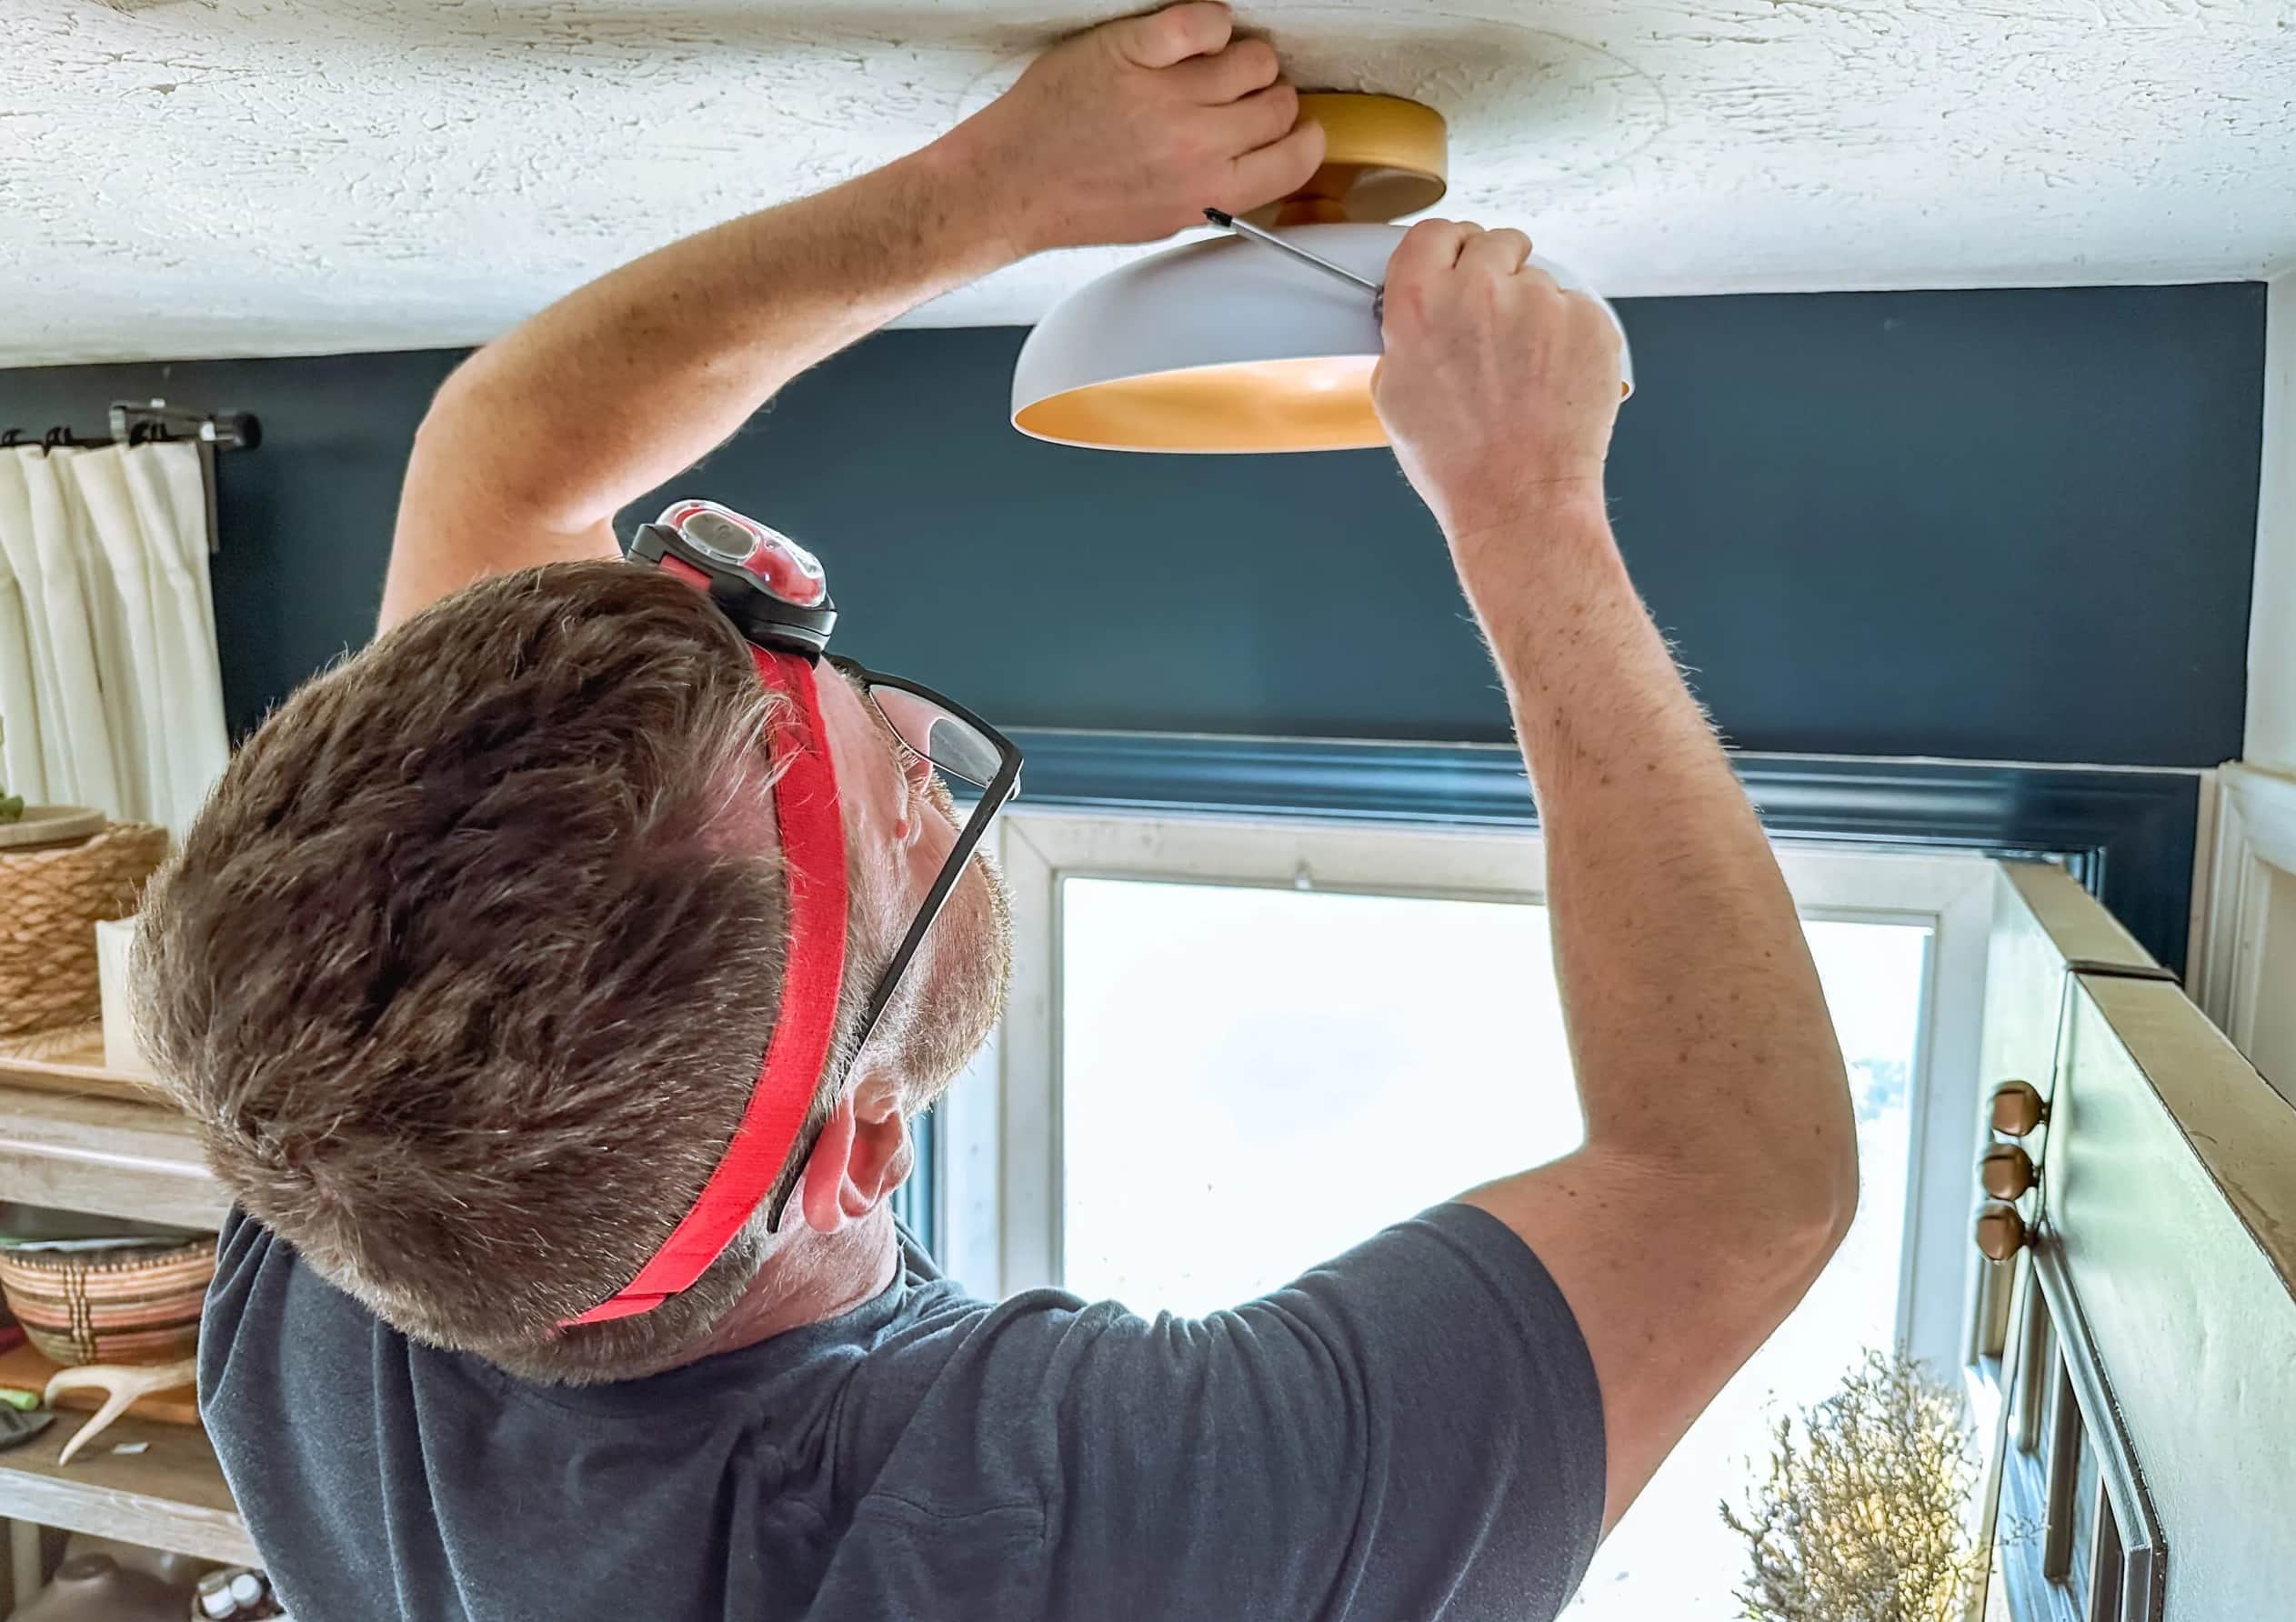 How To Attach A Ceiling Light